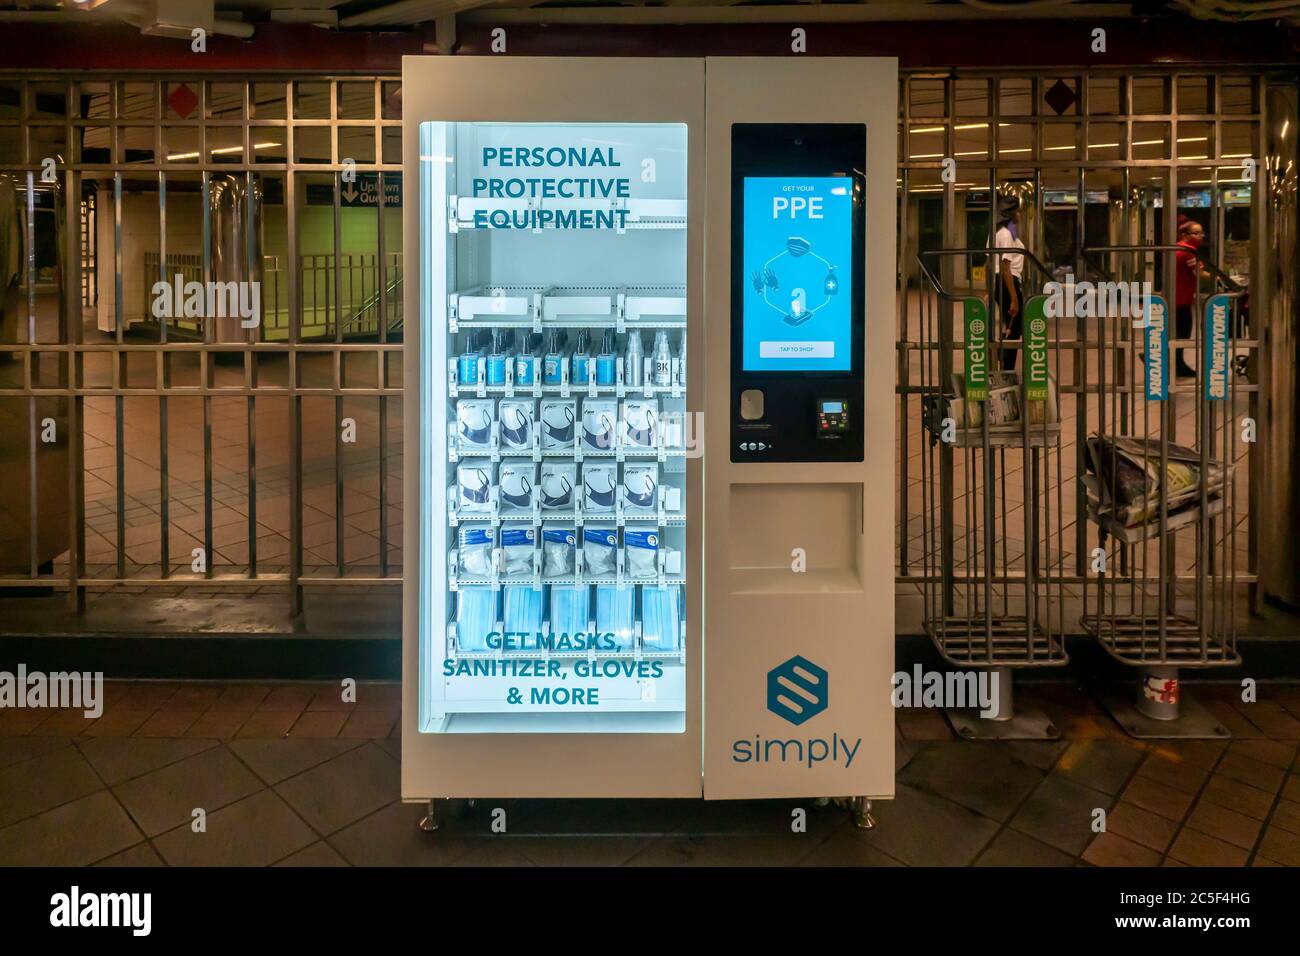 A vending machine in the Herald Square subway station in New York on Tuesday, June 30, 2020 sells PPE merchandise to riders. The MTA has placed twelve vending machines selling personal protective equipment and hand sanitizer in 10 major stations in the system. Masks are required to ride subways and busses. © Richard B. Levine) Stock Photo